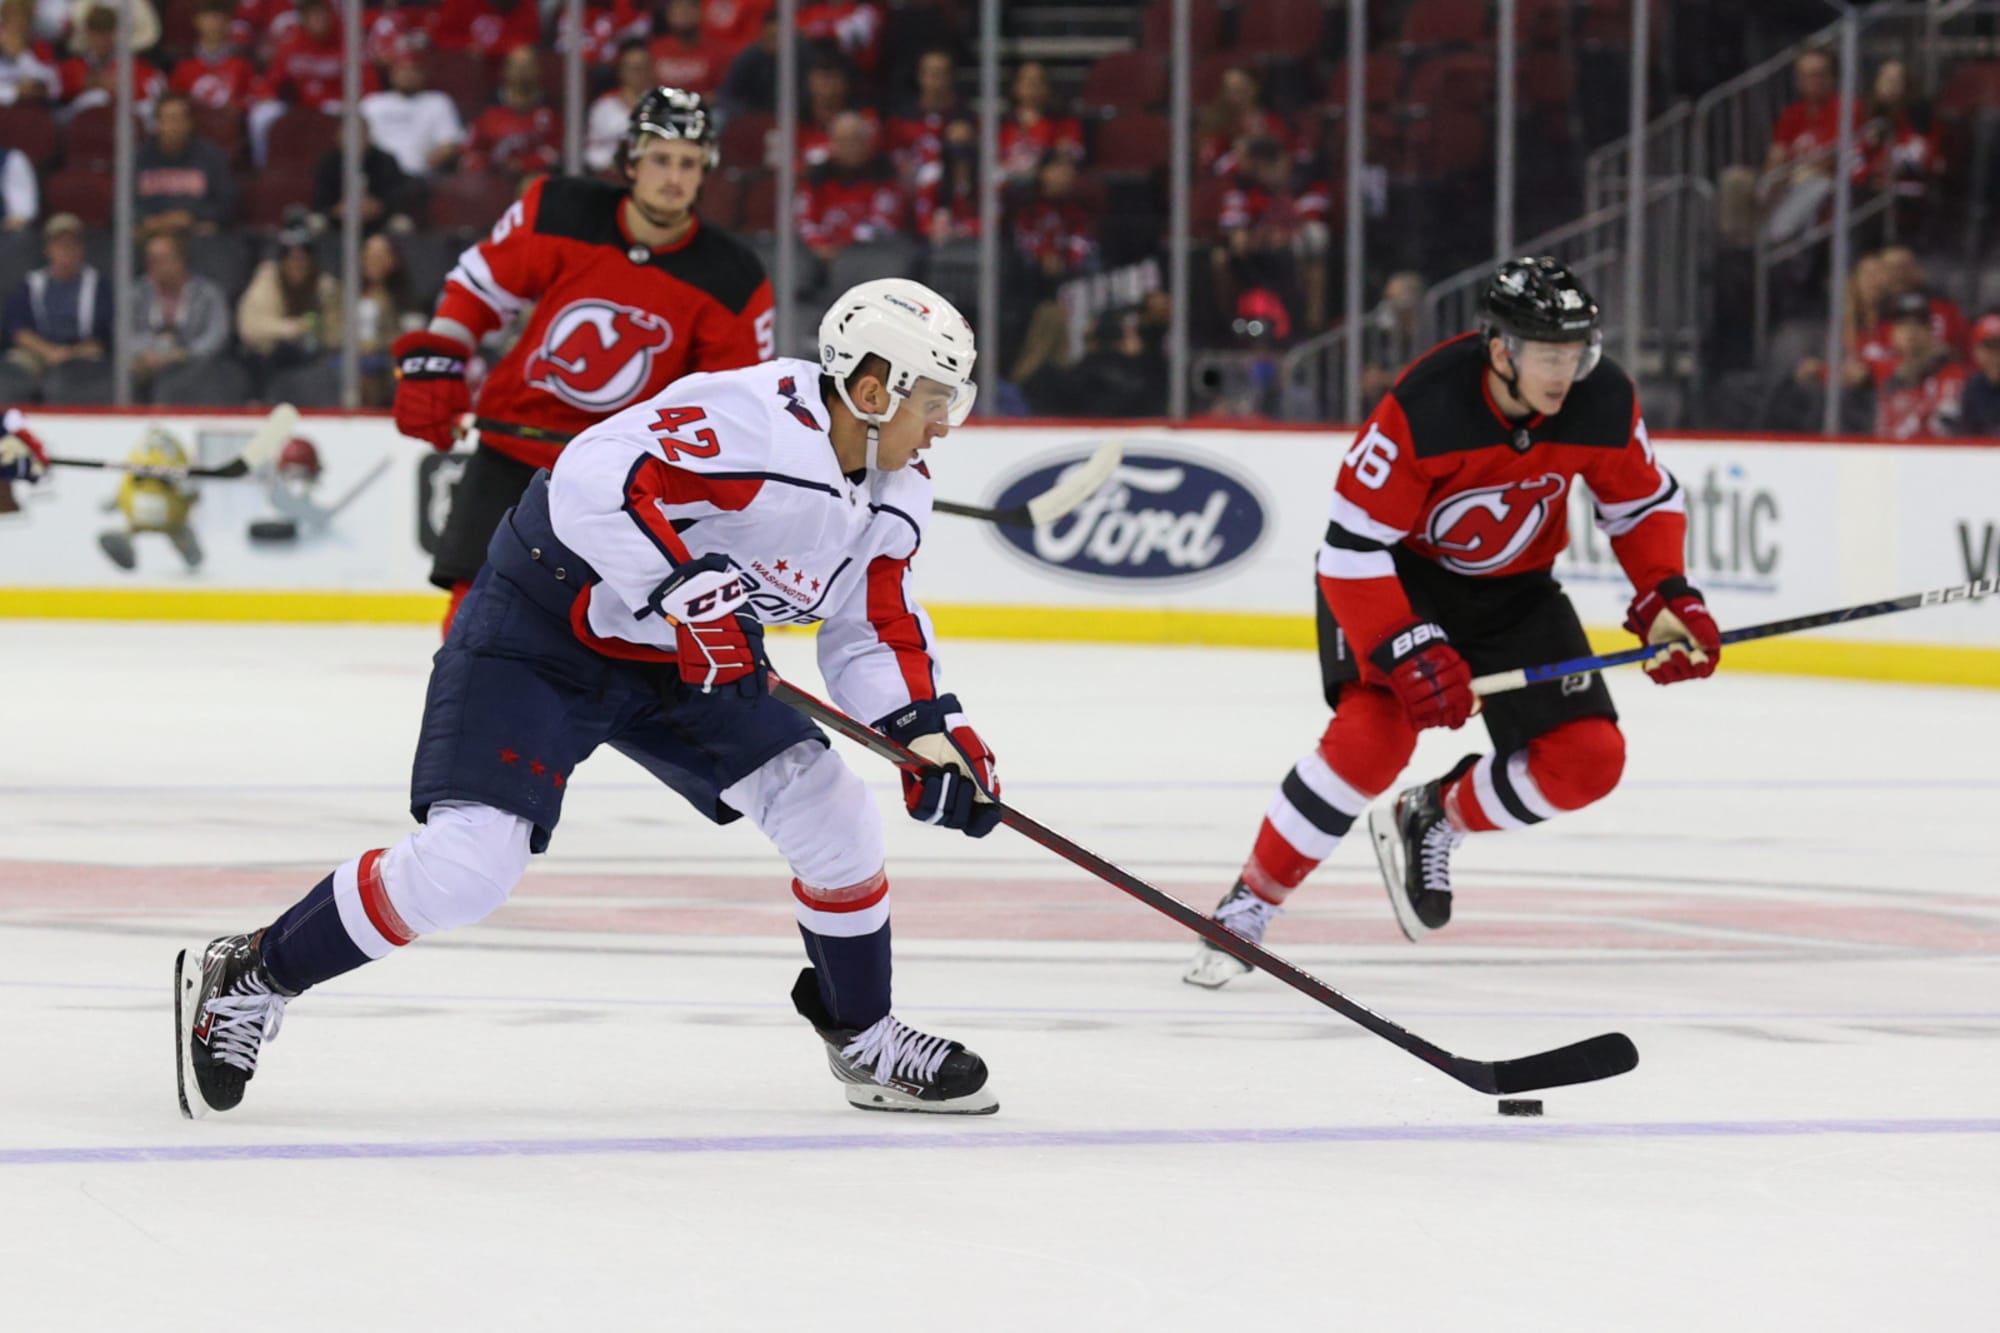 Nicklas Backstrom will play, but Martin Fehervary steps in for